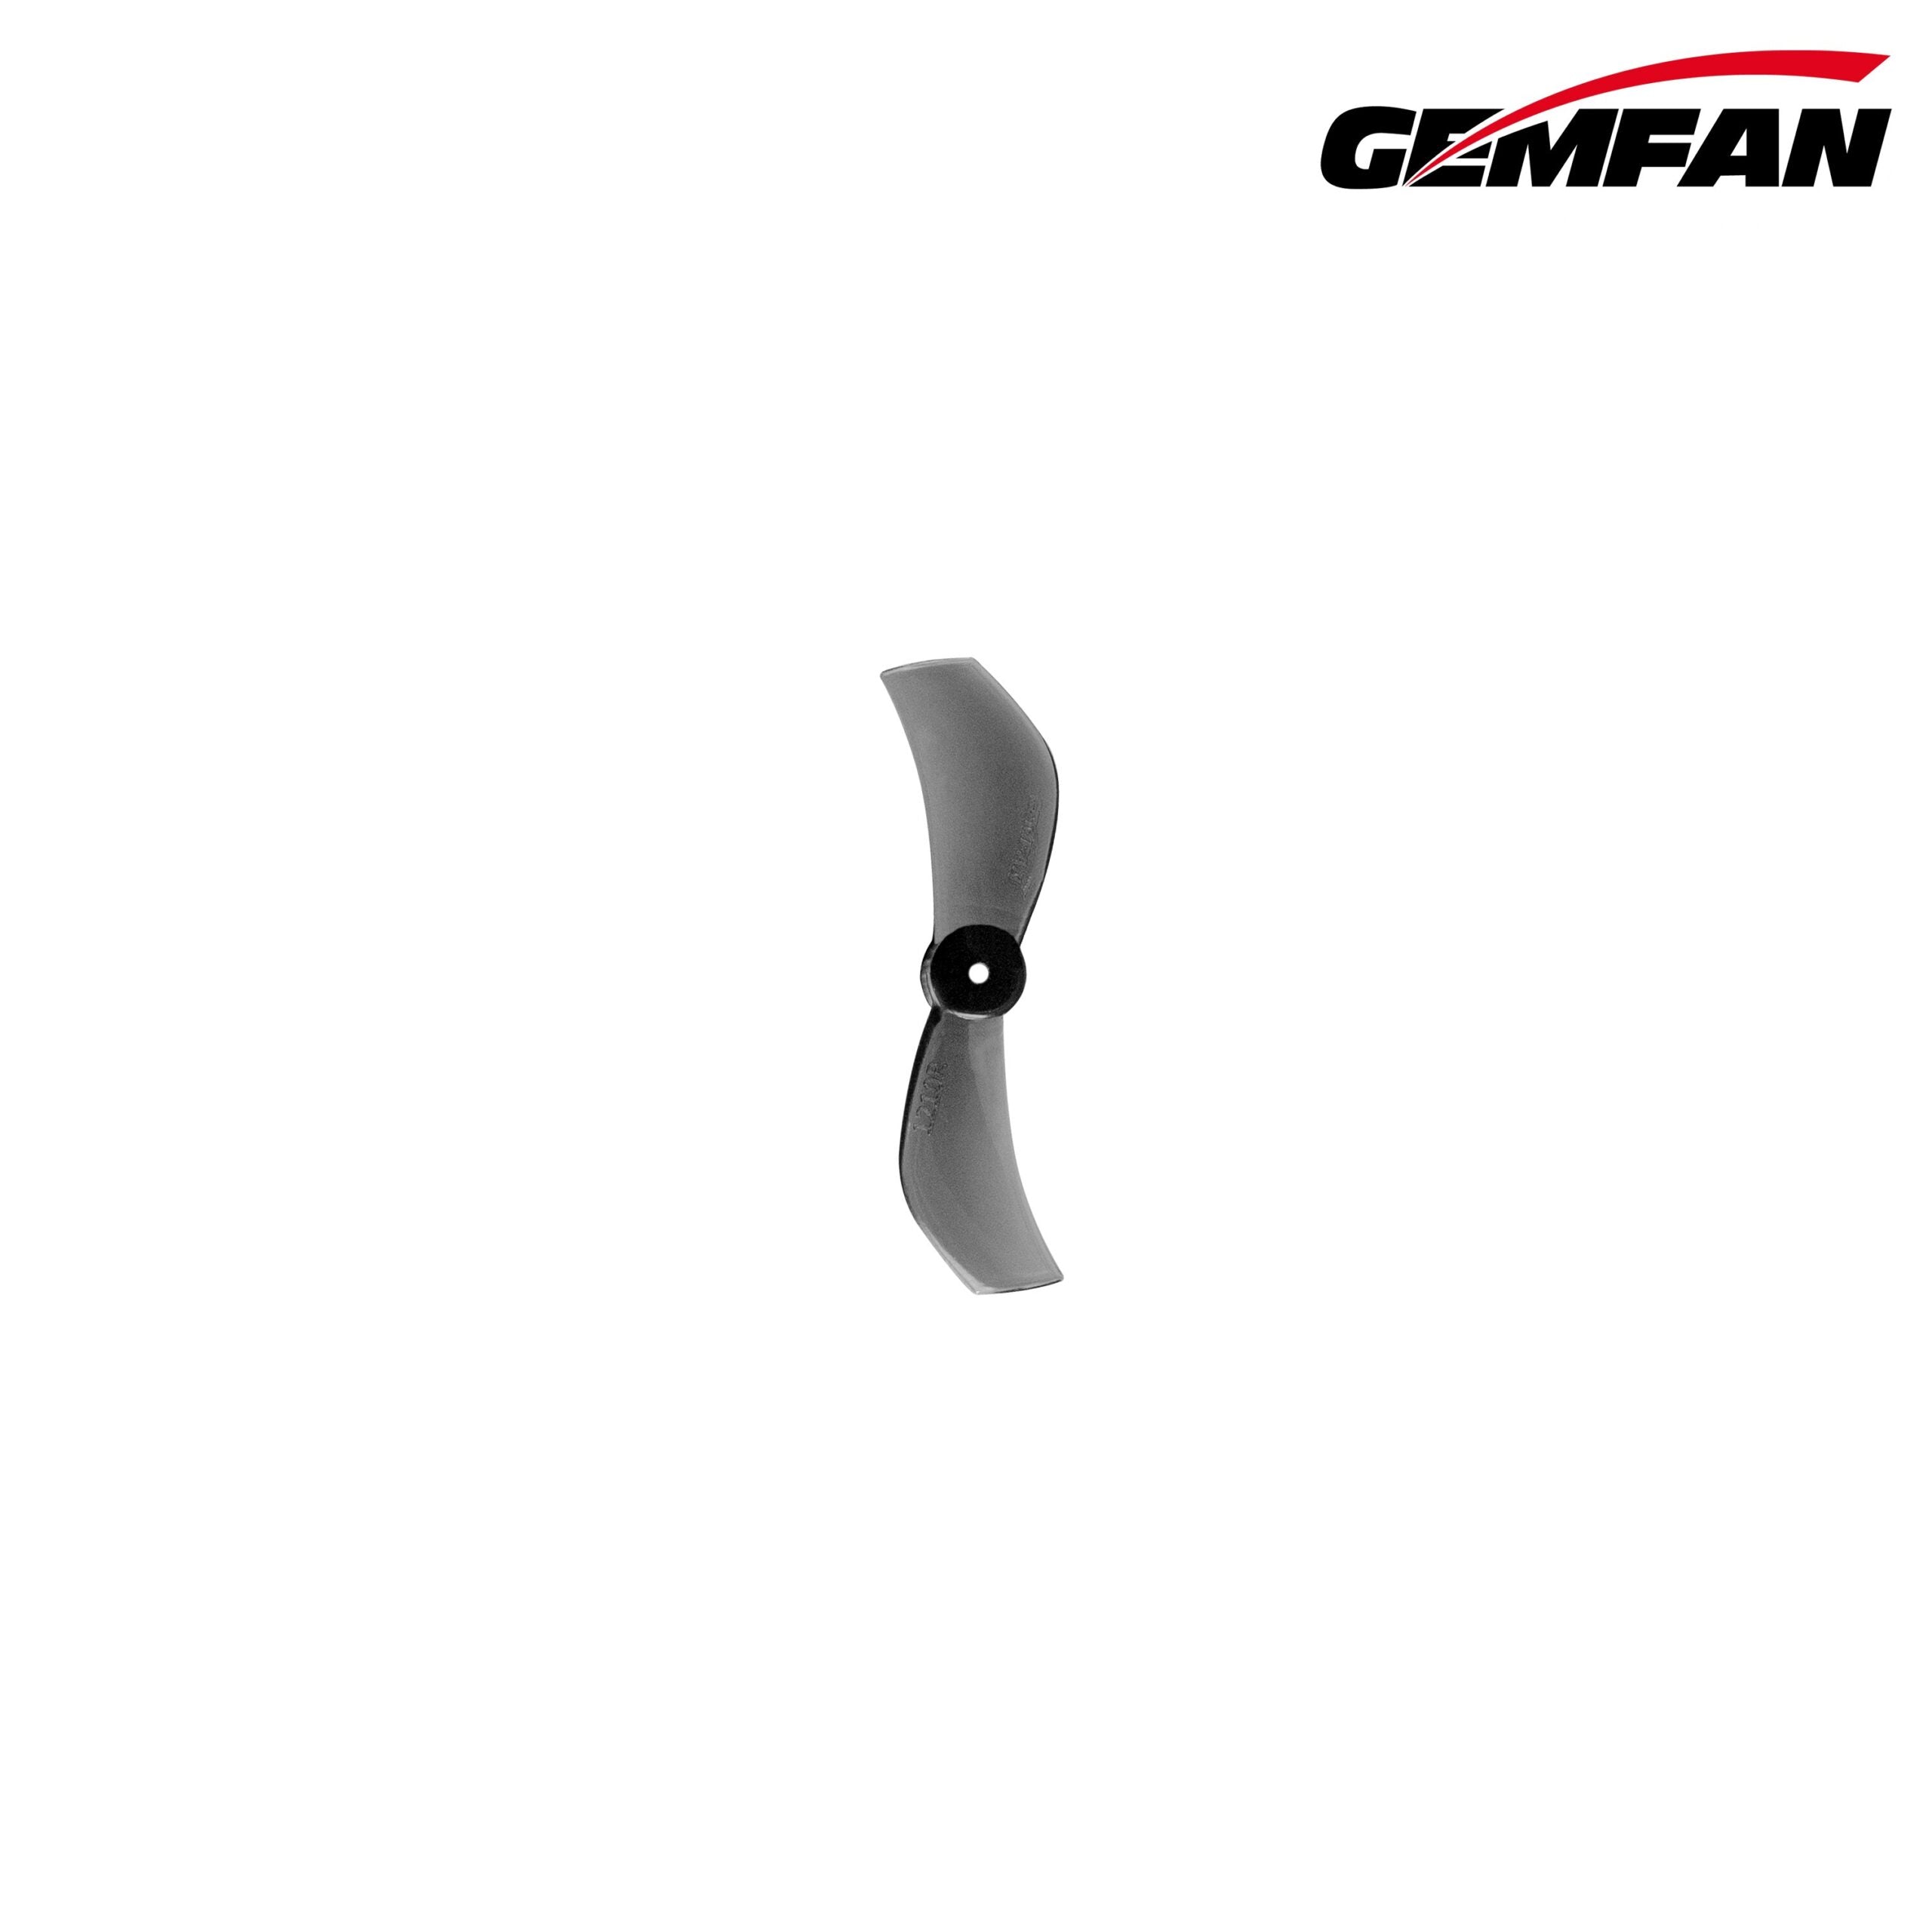 Gemfan-1210-31mm-2-Blade-PC-Propeller-for-RC-FPV-Freestyle-Tinywhoop-Micro-Drones-DIY-Parts-1